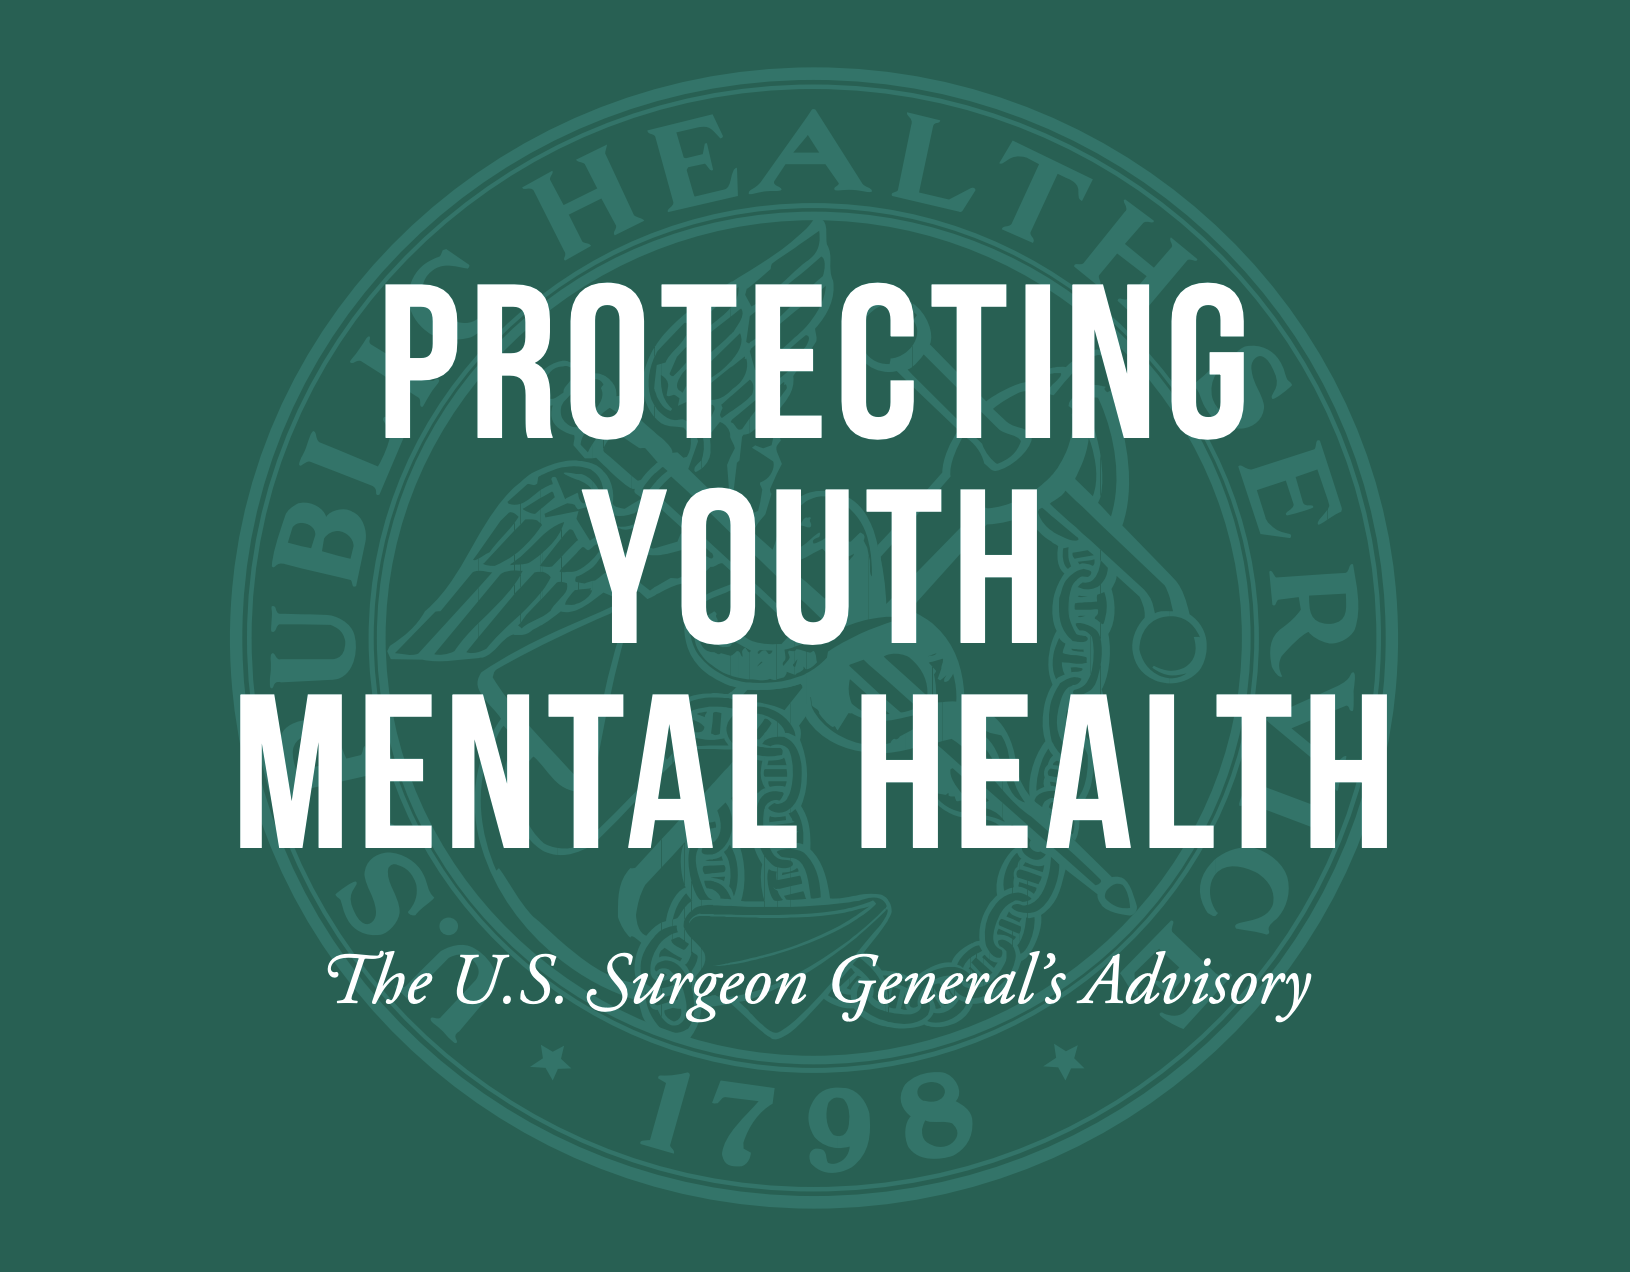 Protecting Youth Mental Health